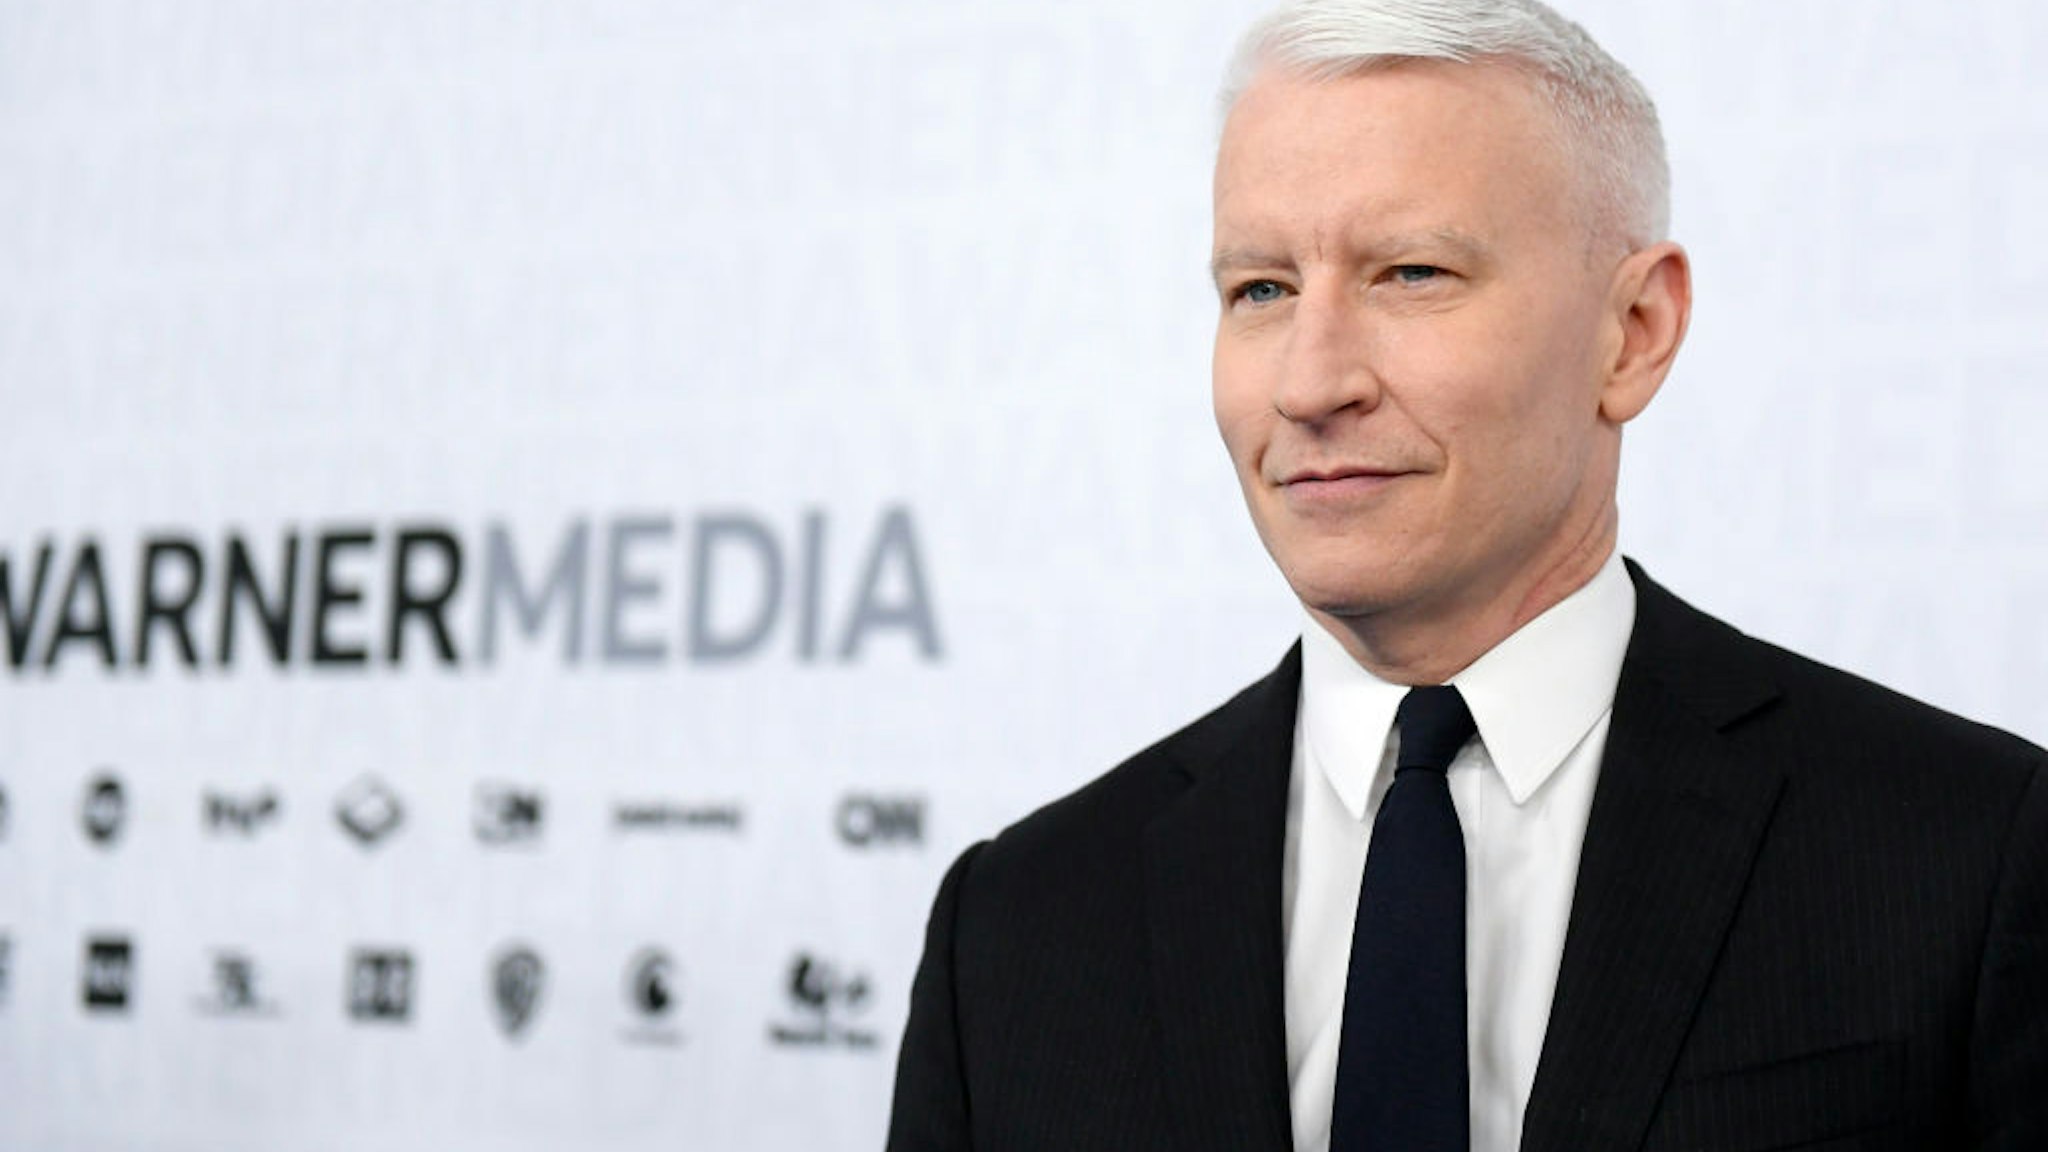 NEW YORK, NEW YORK - MAY 15: Anderson Cooper of CNN’s Anderson Cooper 360° attends the WarnerMedia Upfront 2019 arrivals on the red carpet at The Theater at Madison Square Garden on May 15, 2019 in New York City. 602140 (Photo by Mike Coppola/Getty Images for WarnerMedia)